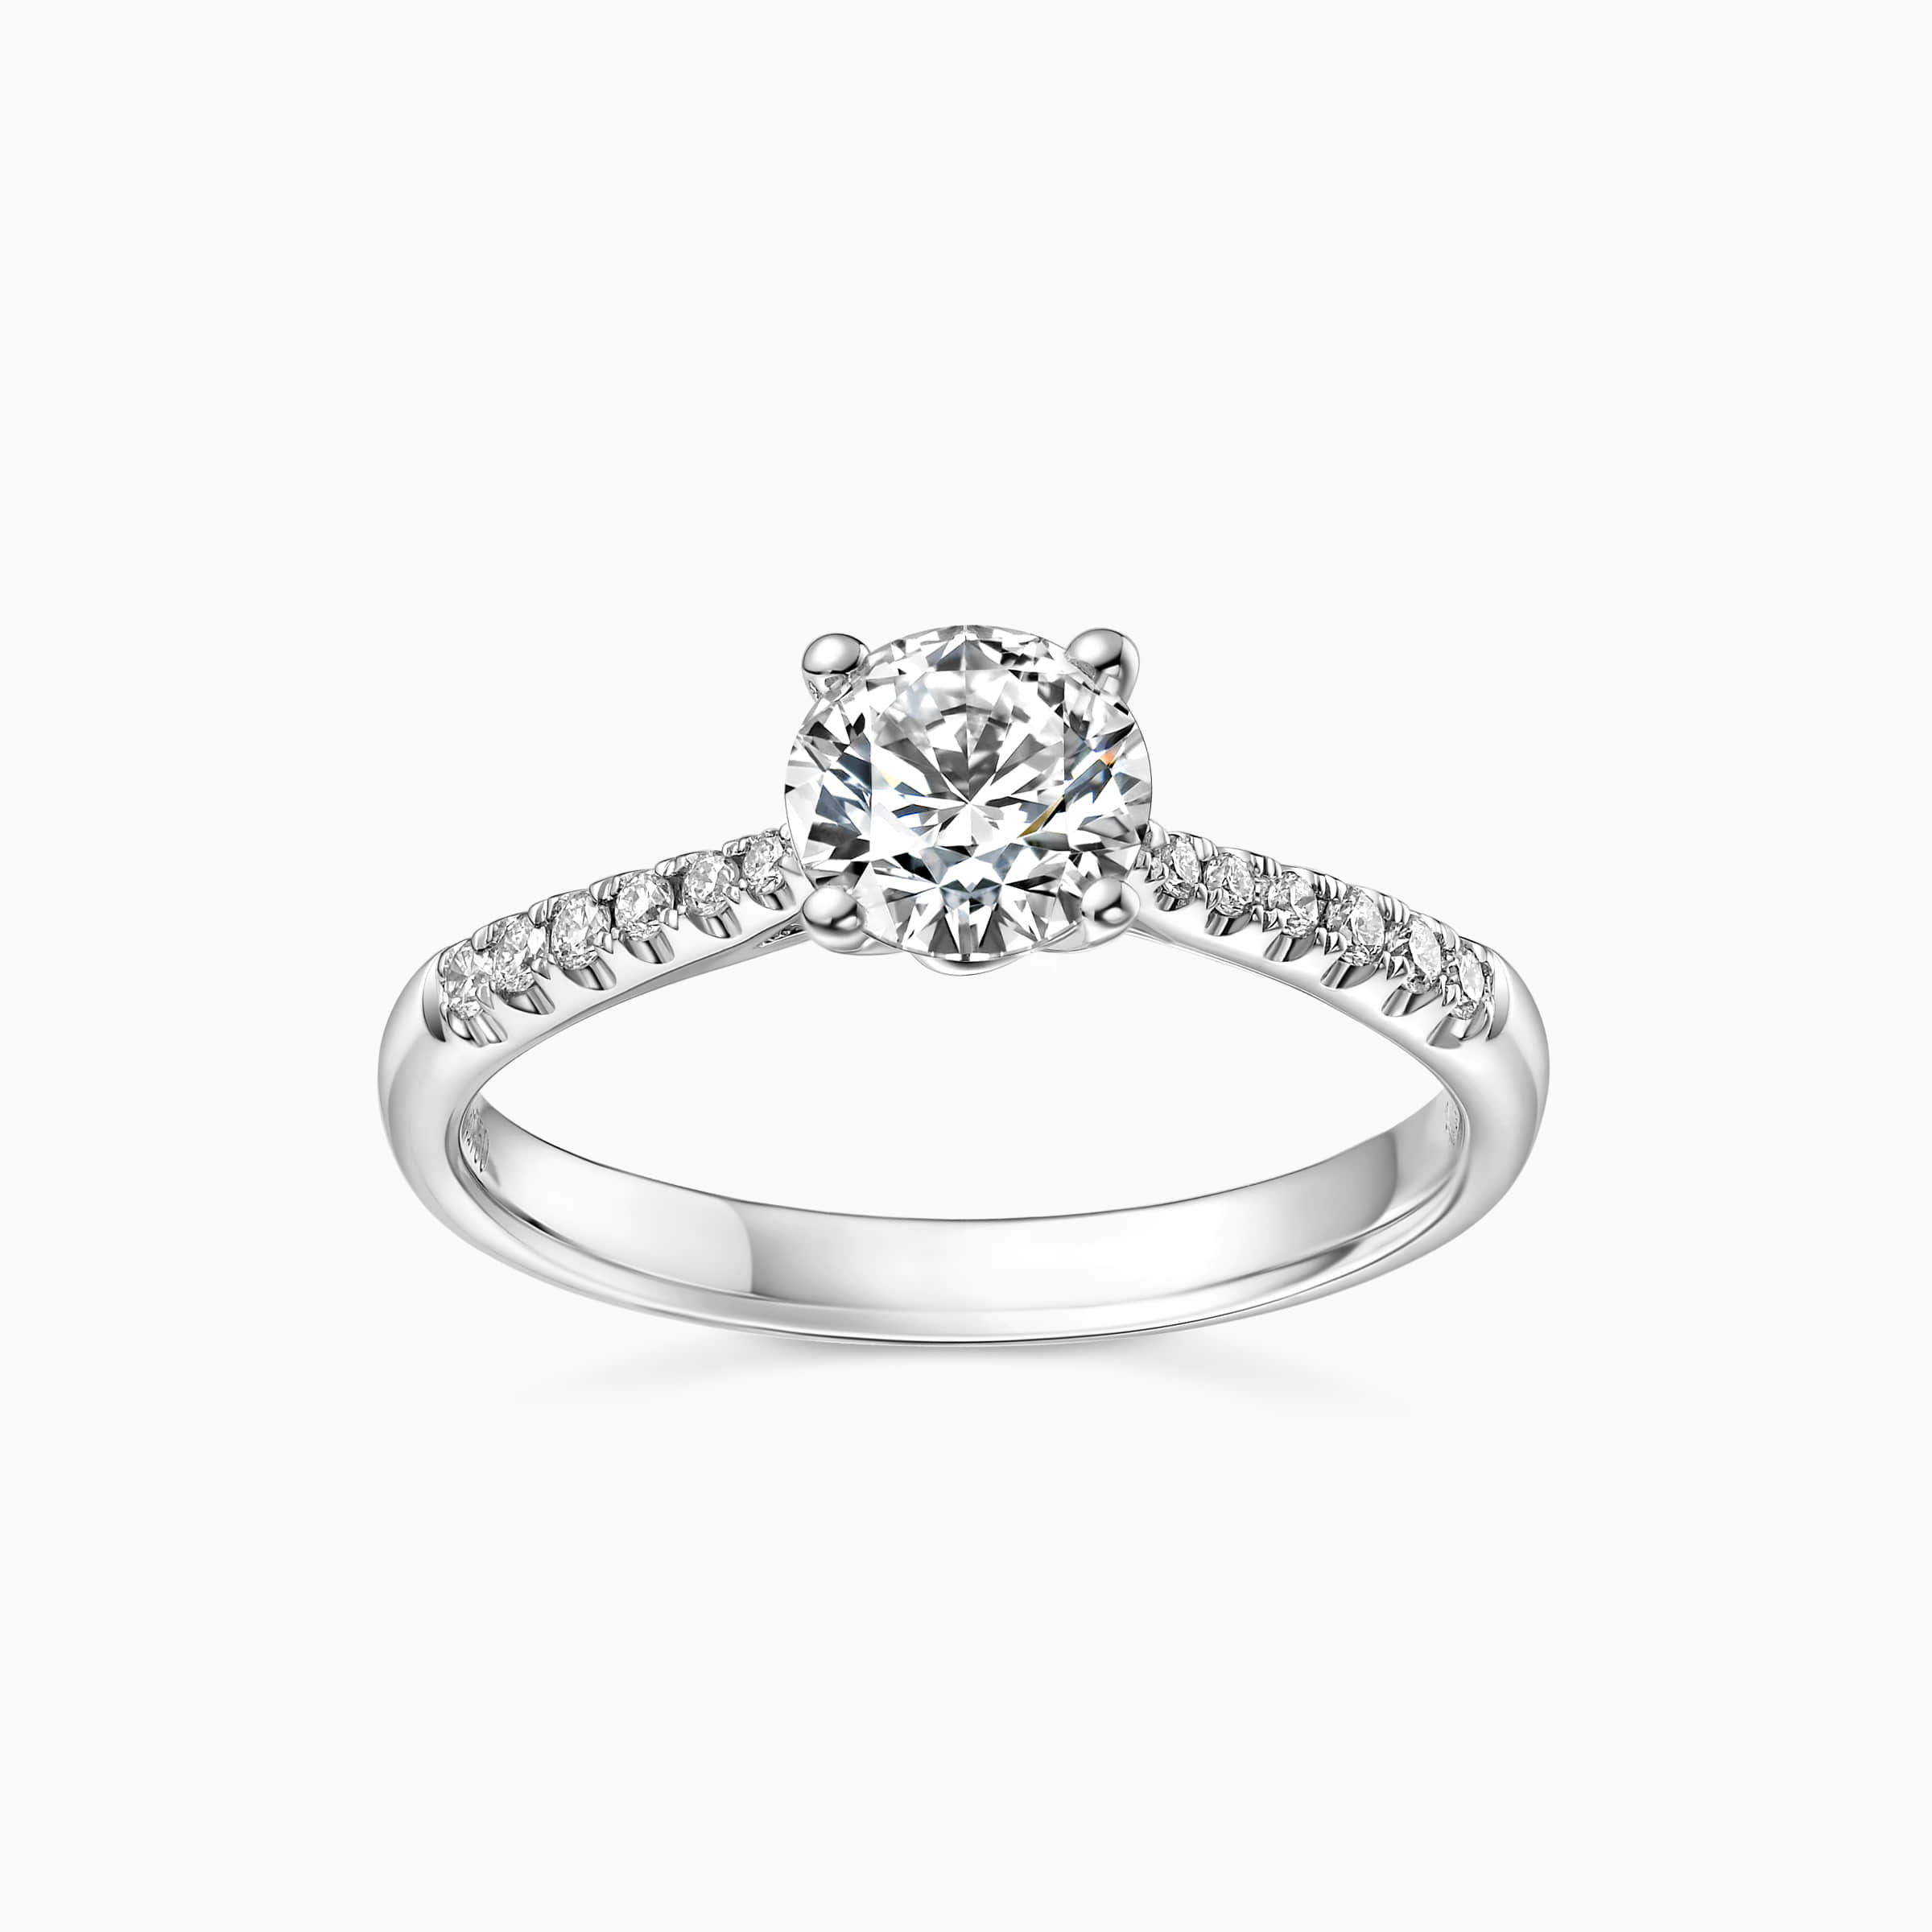 darry ring 4 prong engagement ring top view